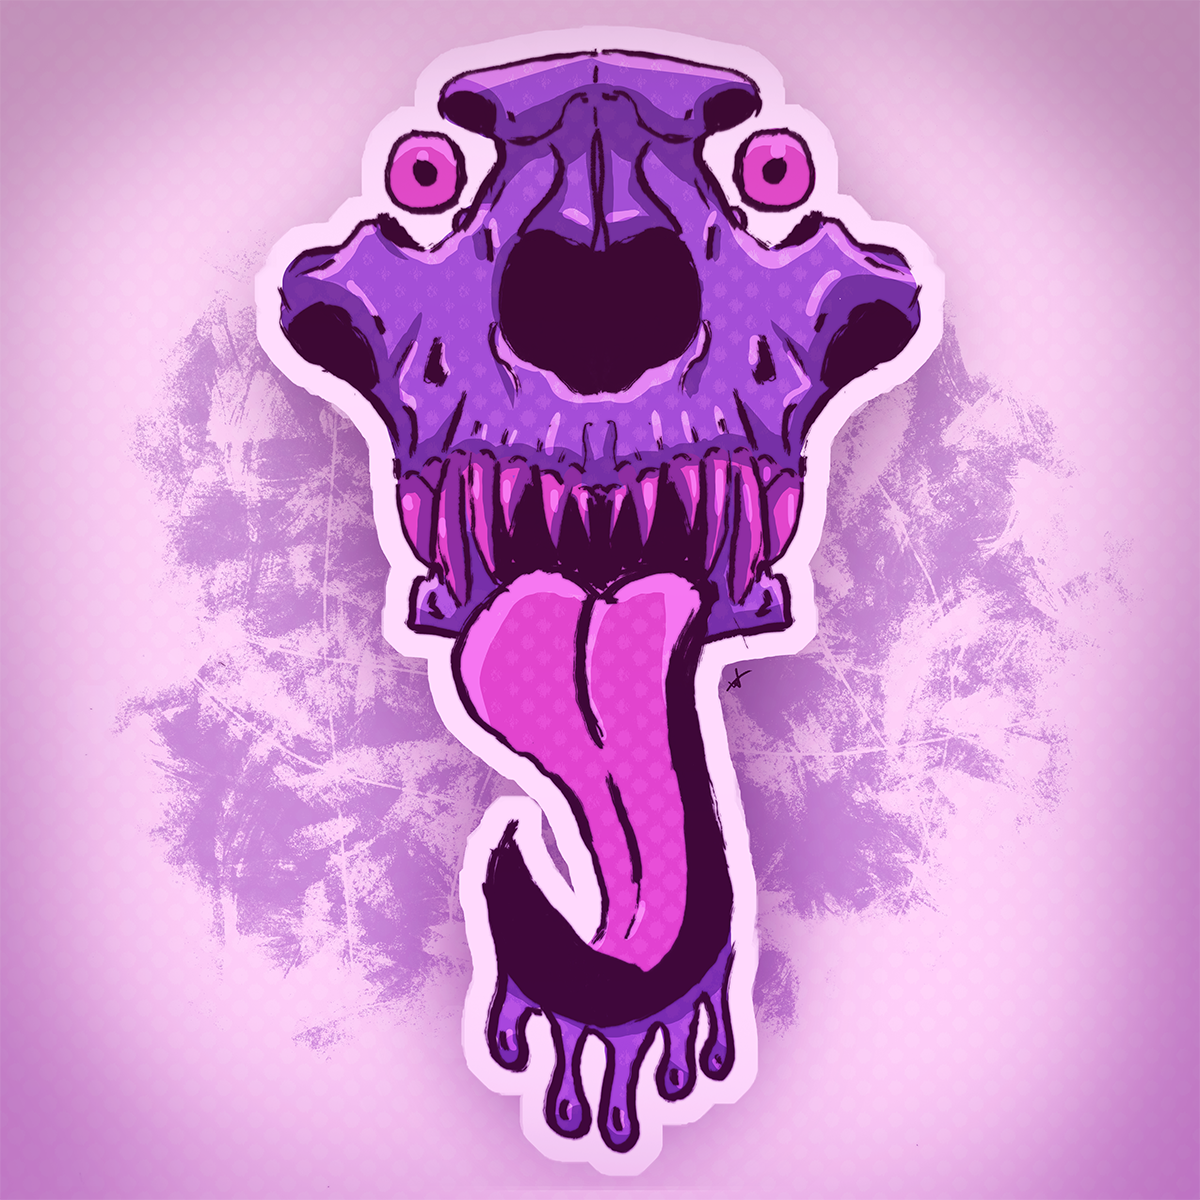 An illustration by Brian Wolfe of a purple and pink animal skull with sharp pointed teeth, eyes floating outside their sockets, a long curling tongue hanging below, dripping with saliva.